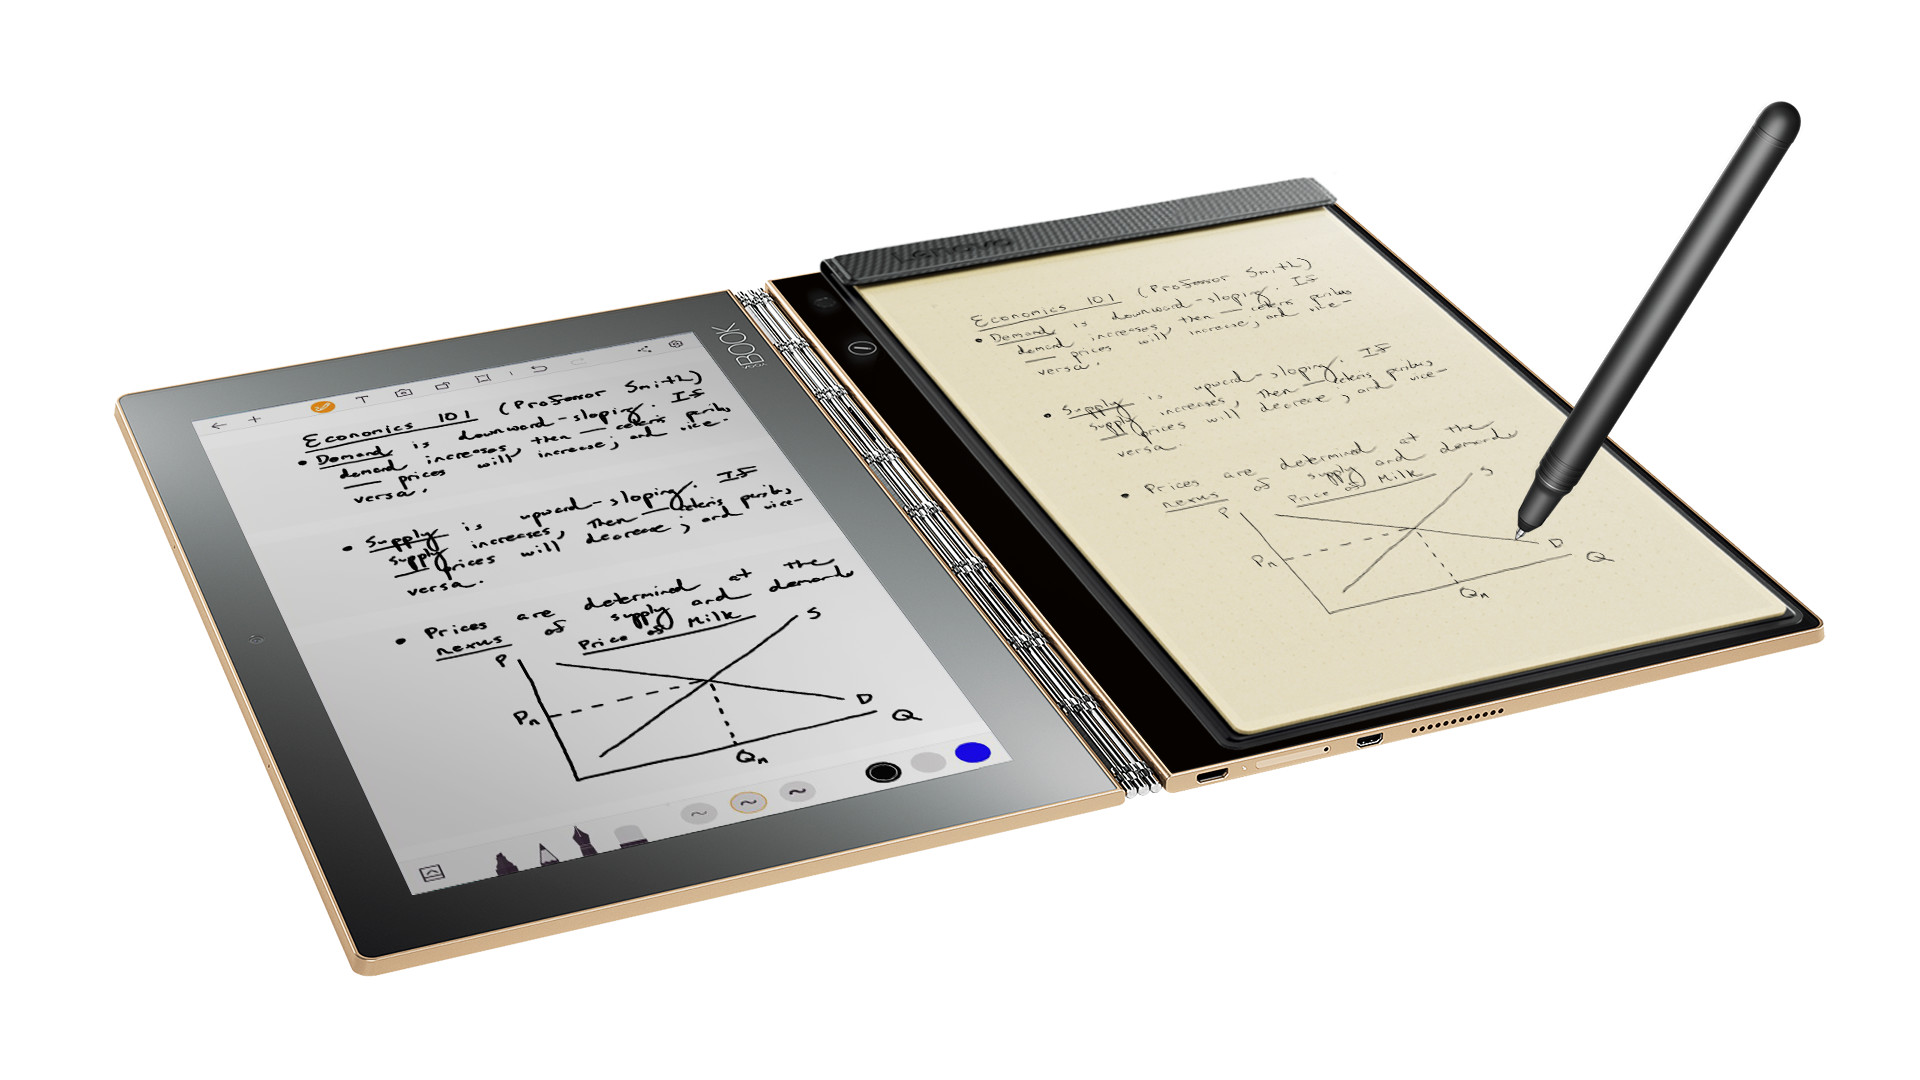 1920x1080 Yoga Book: The First Tablet for Natural Sketching and Note-Taking